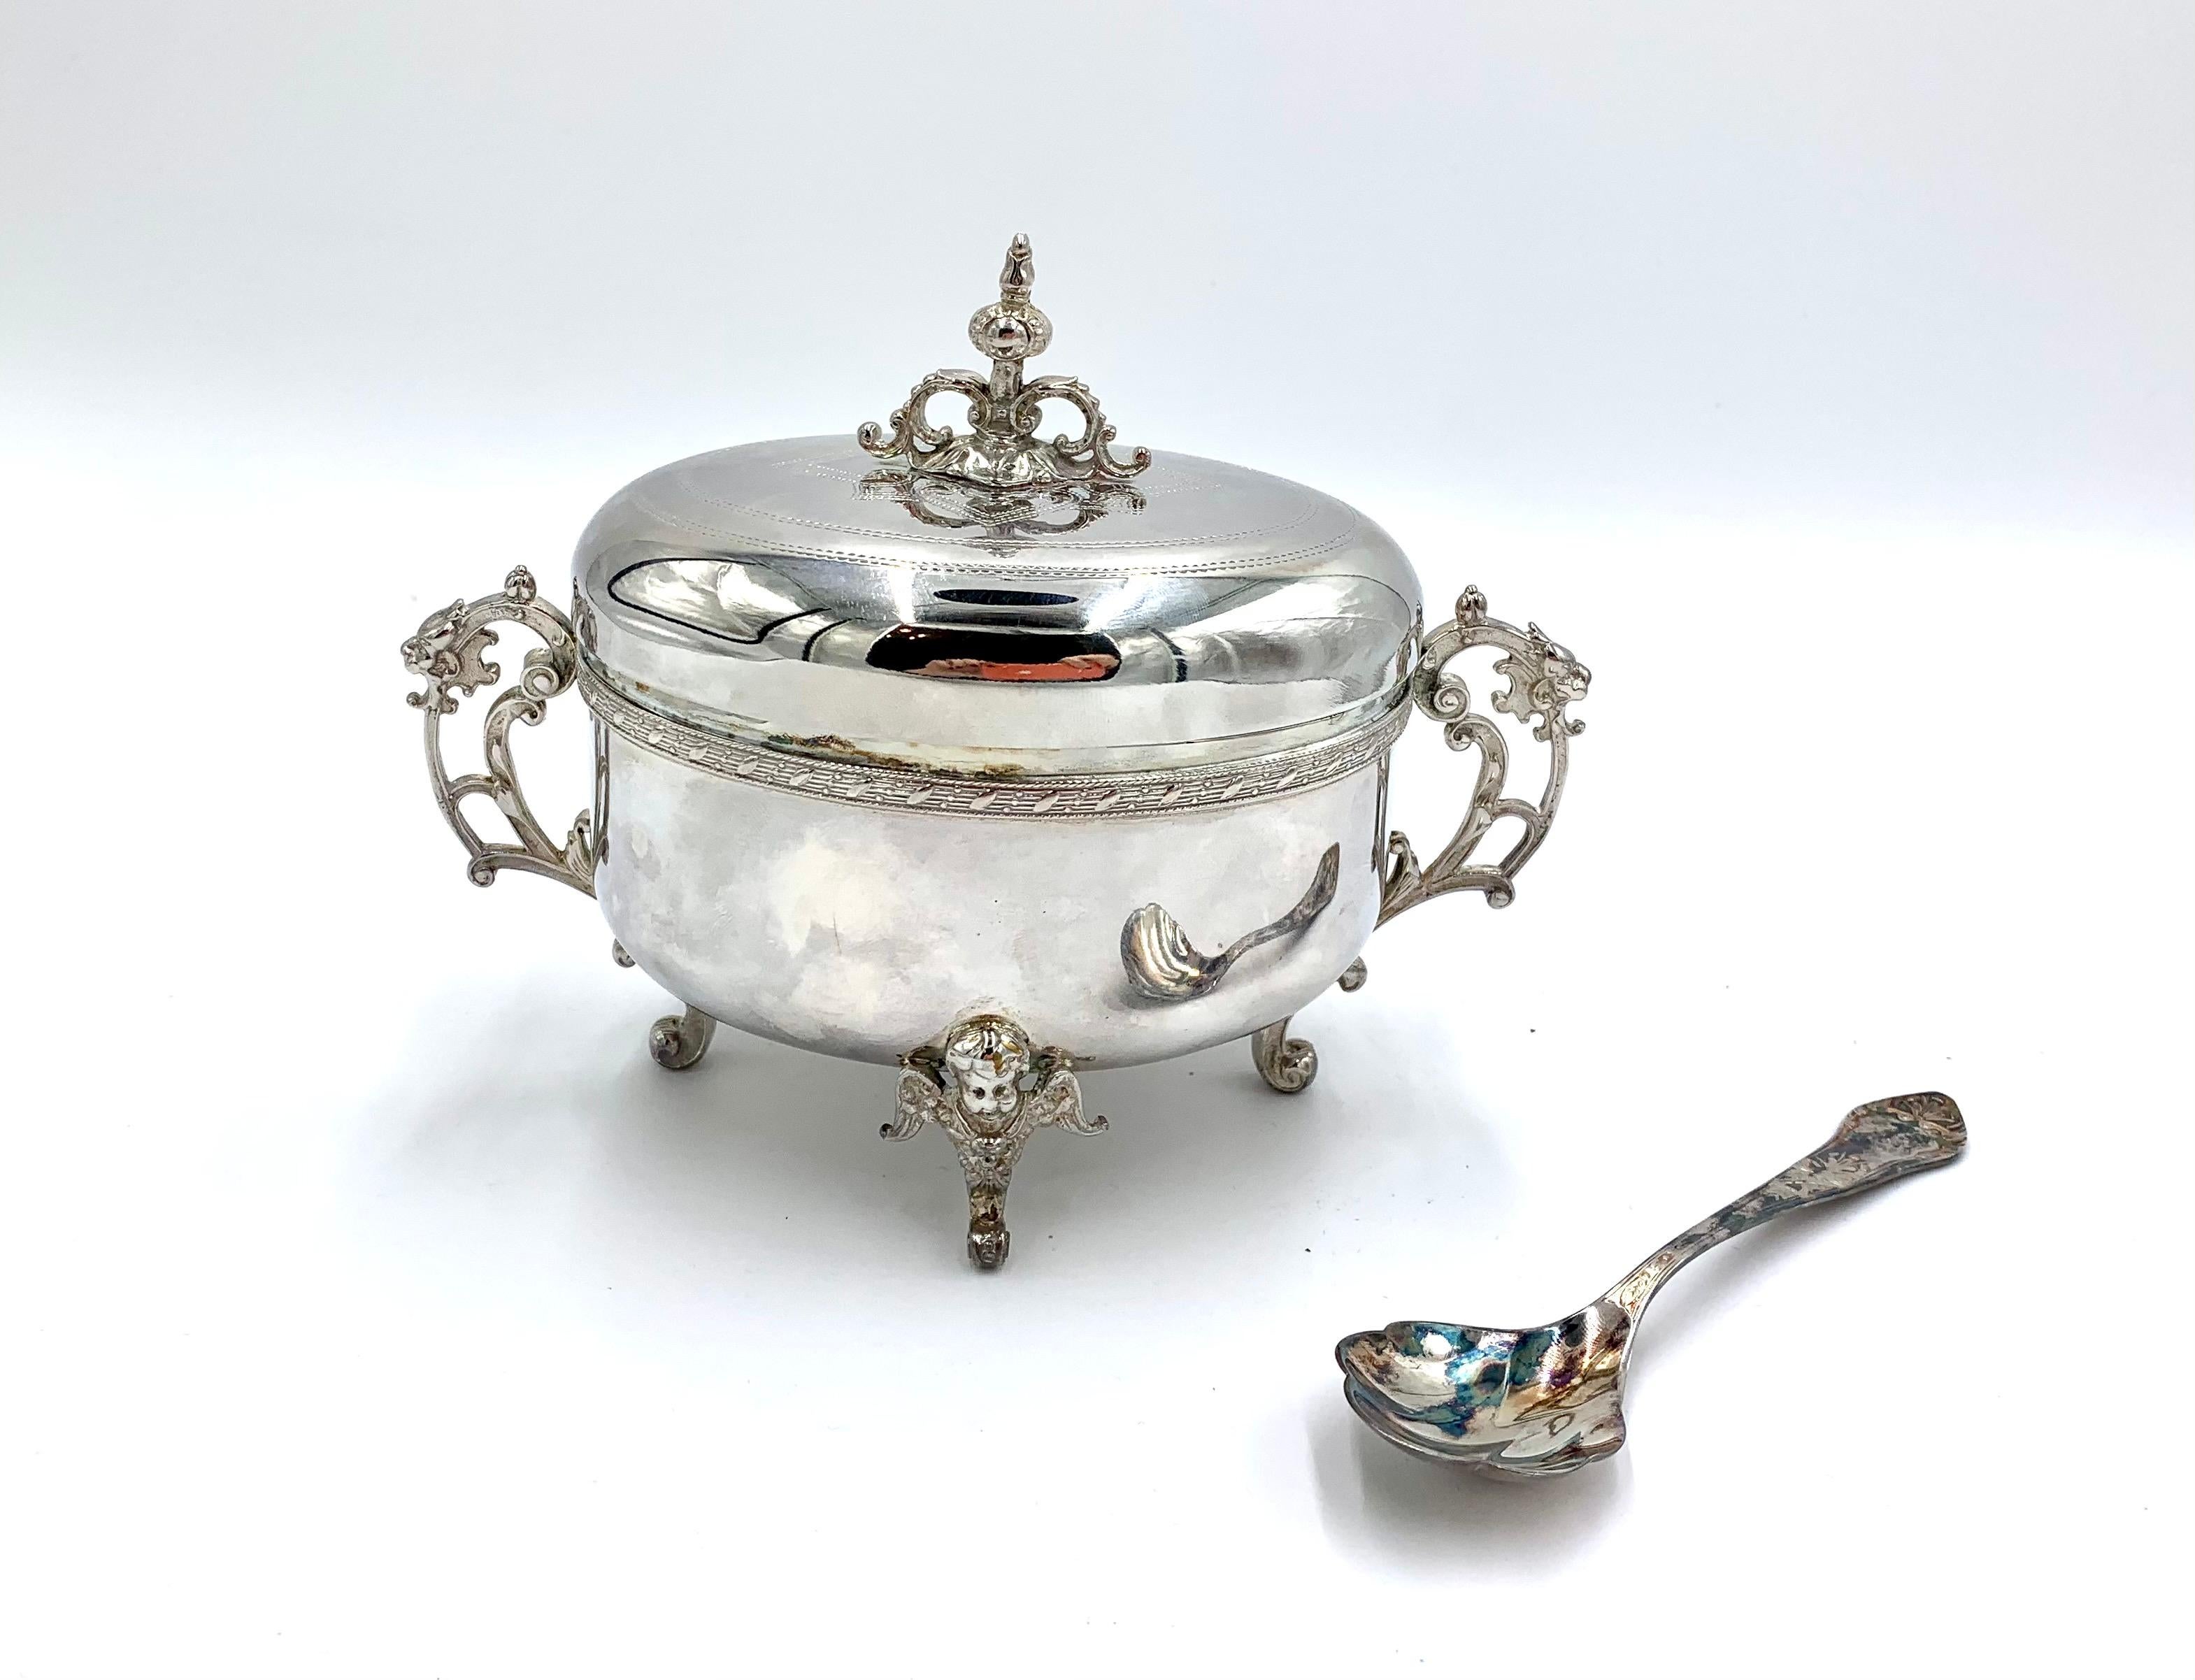 A silver-plated oval sugar bowl rested on four legs.

Decorated with a horizontal stripe on the body and a rosette on the lid.

Fraget pattern, very good condition. The 60s / 70s.

Dimensions: height with a lid: 14 cm, total width 20 cm, depth